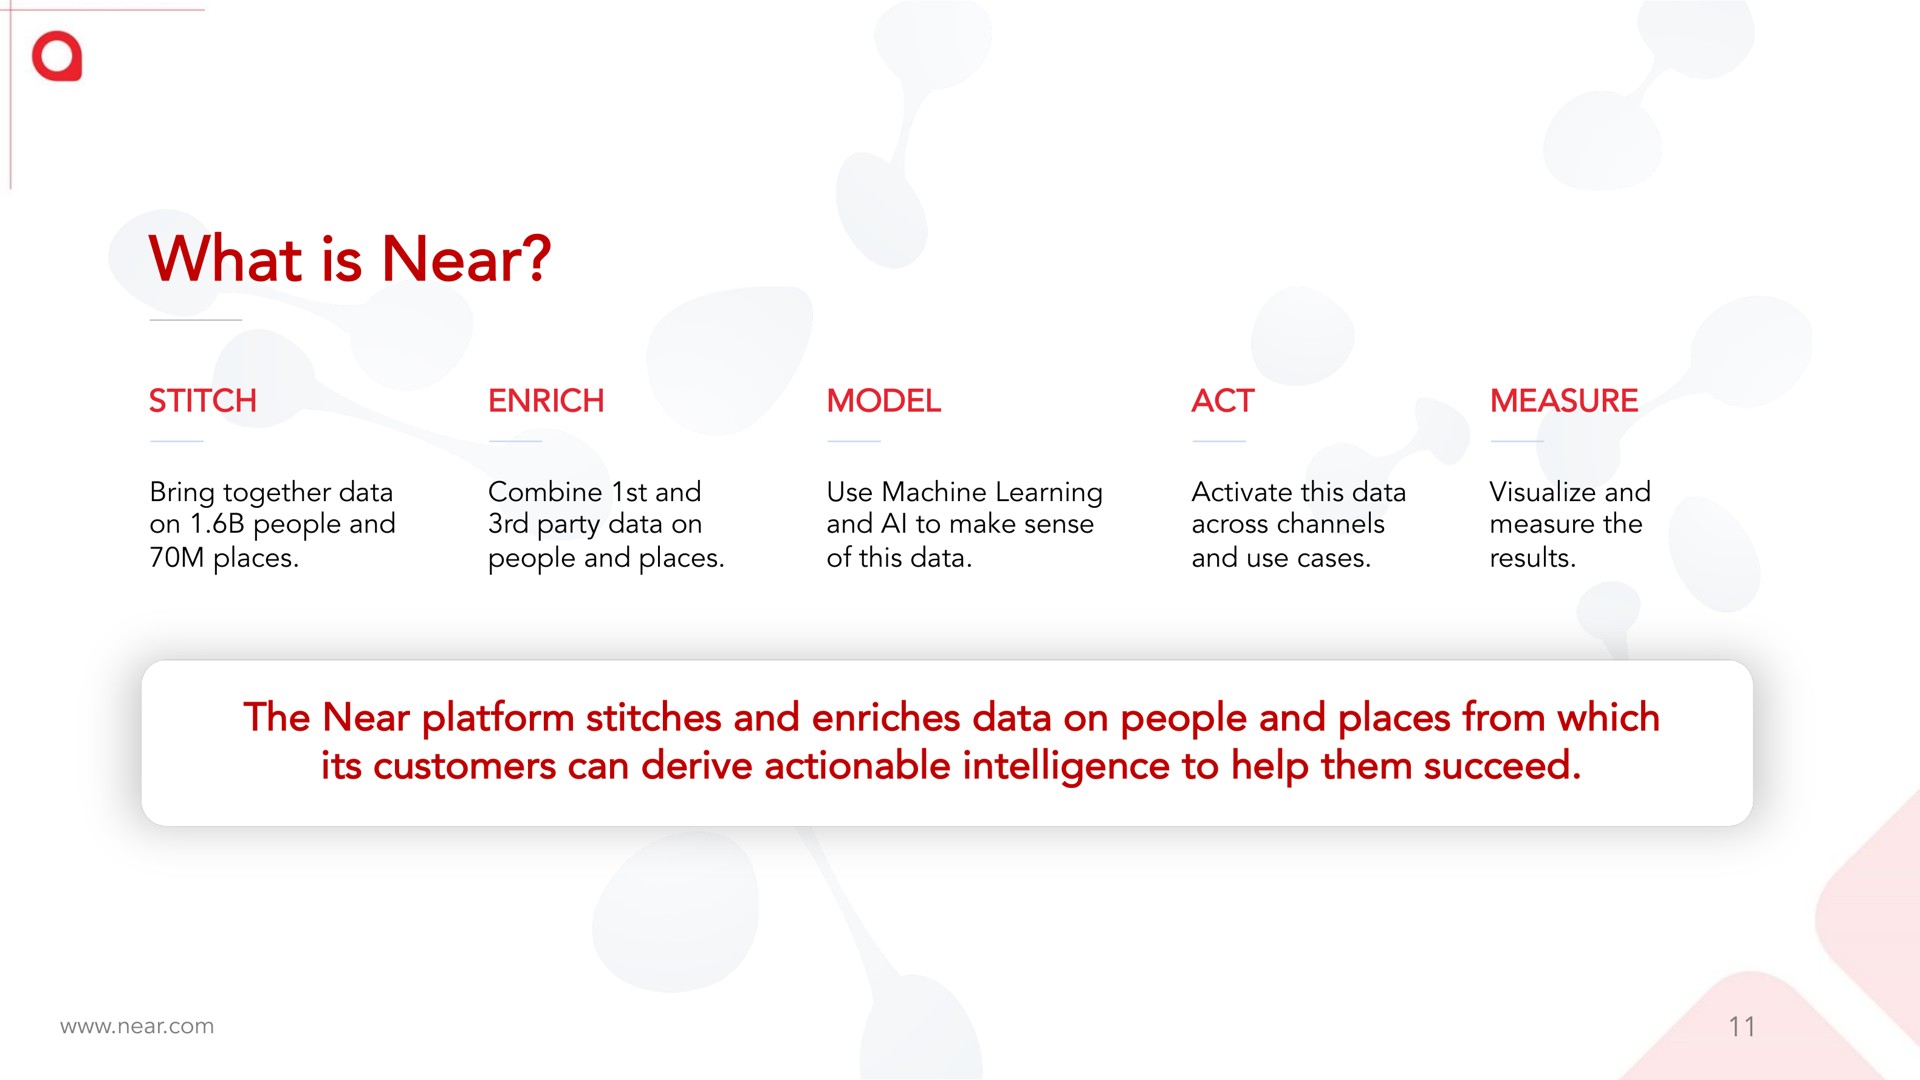 what is near the near platform stitches and enriches data on people and places from which its customers can derive actionable intelligence to help them succeed | Near